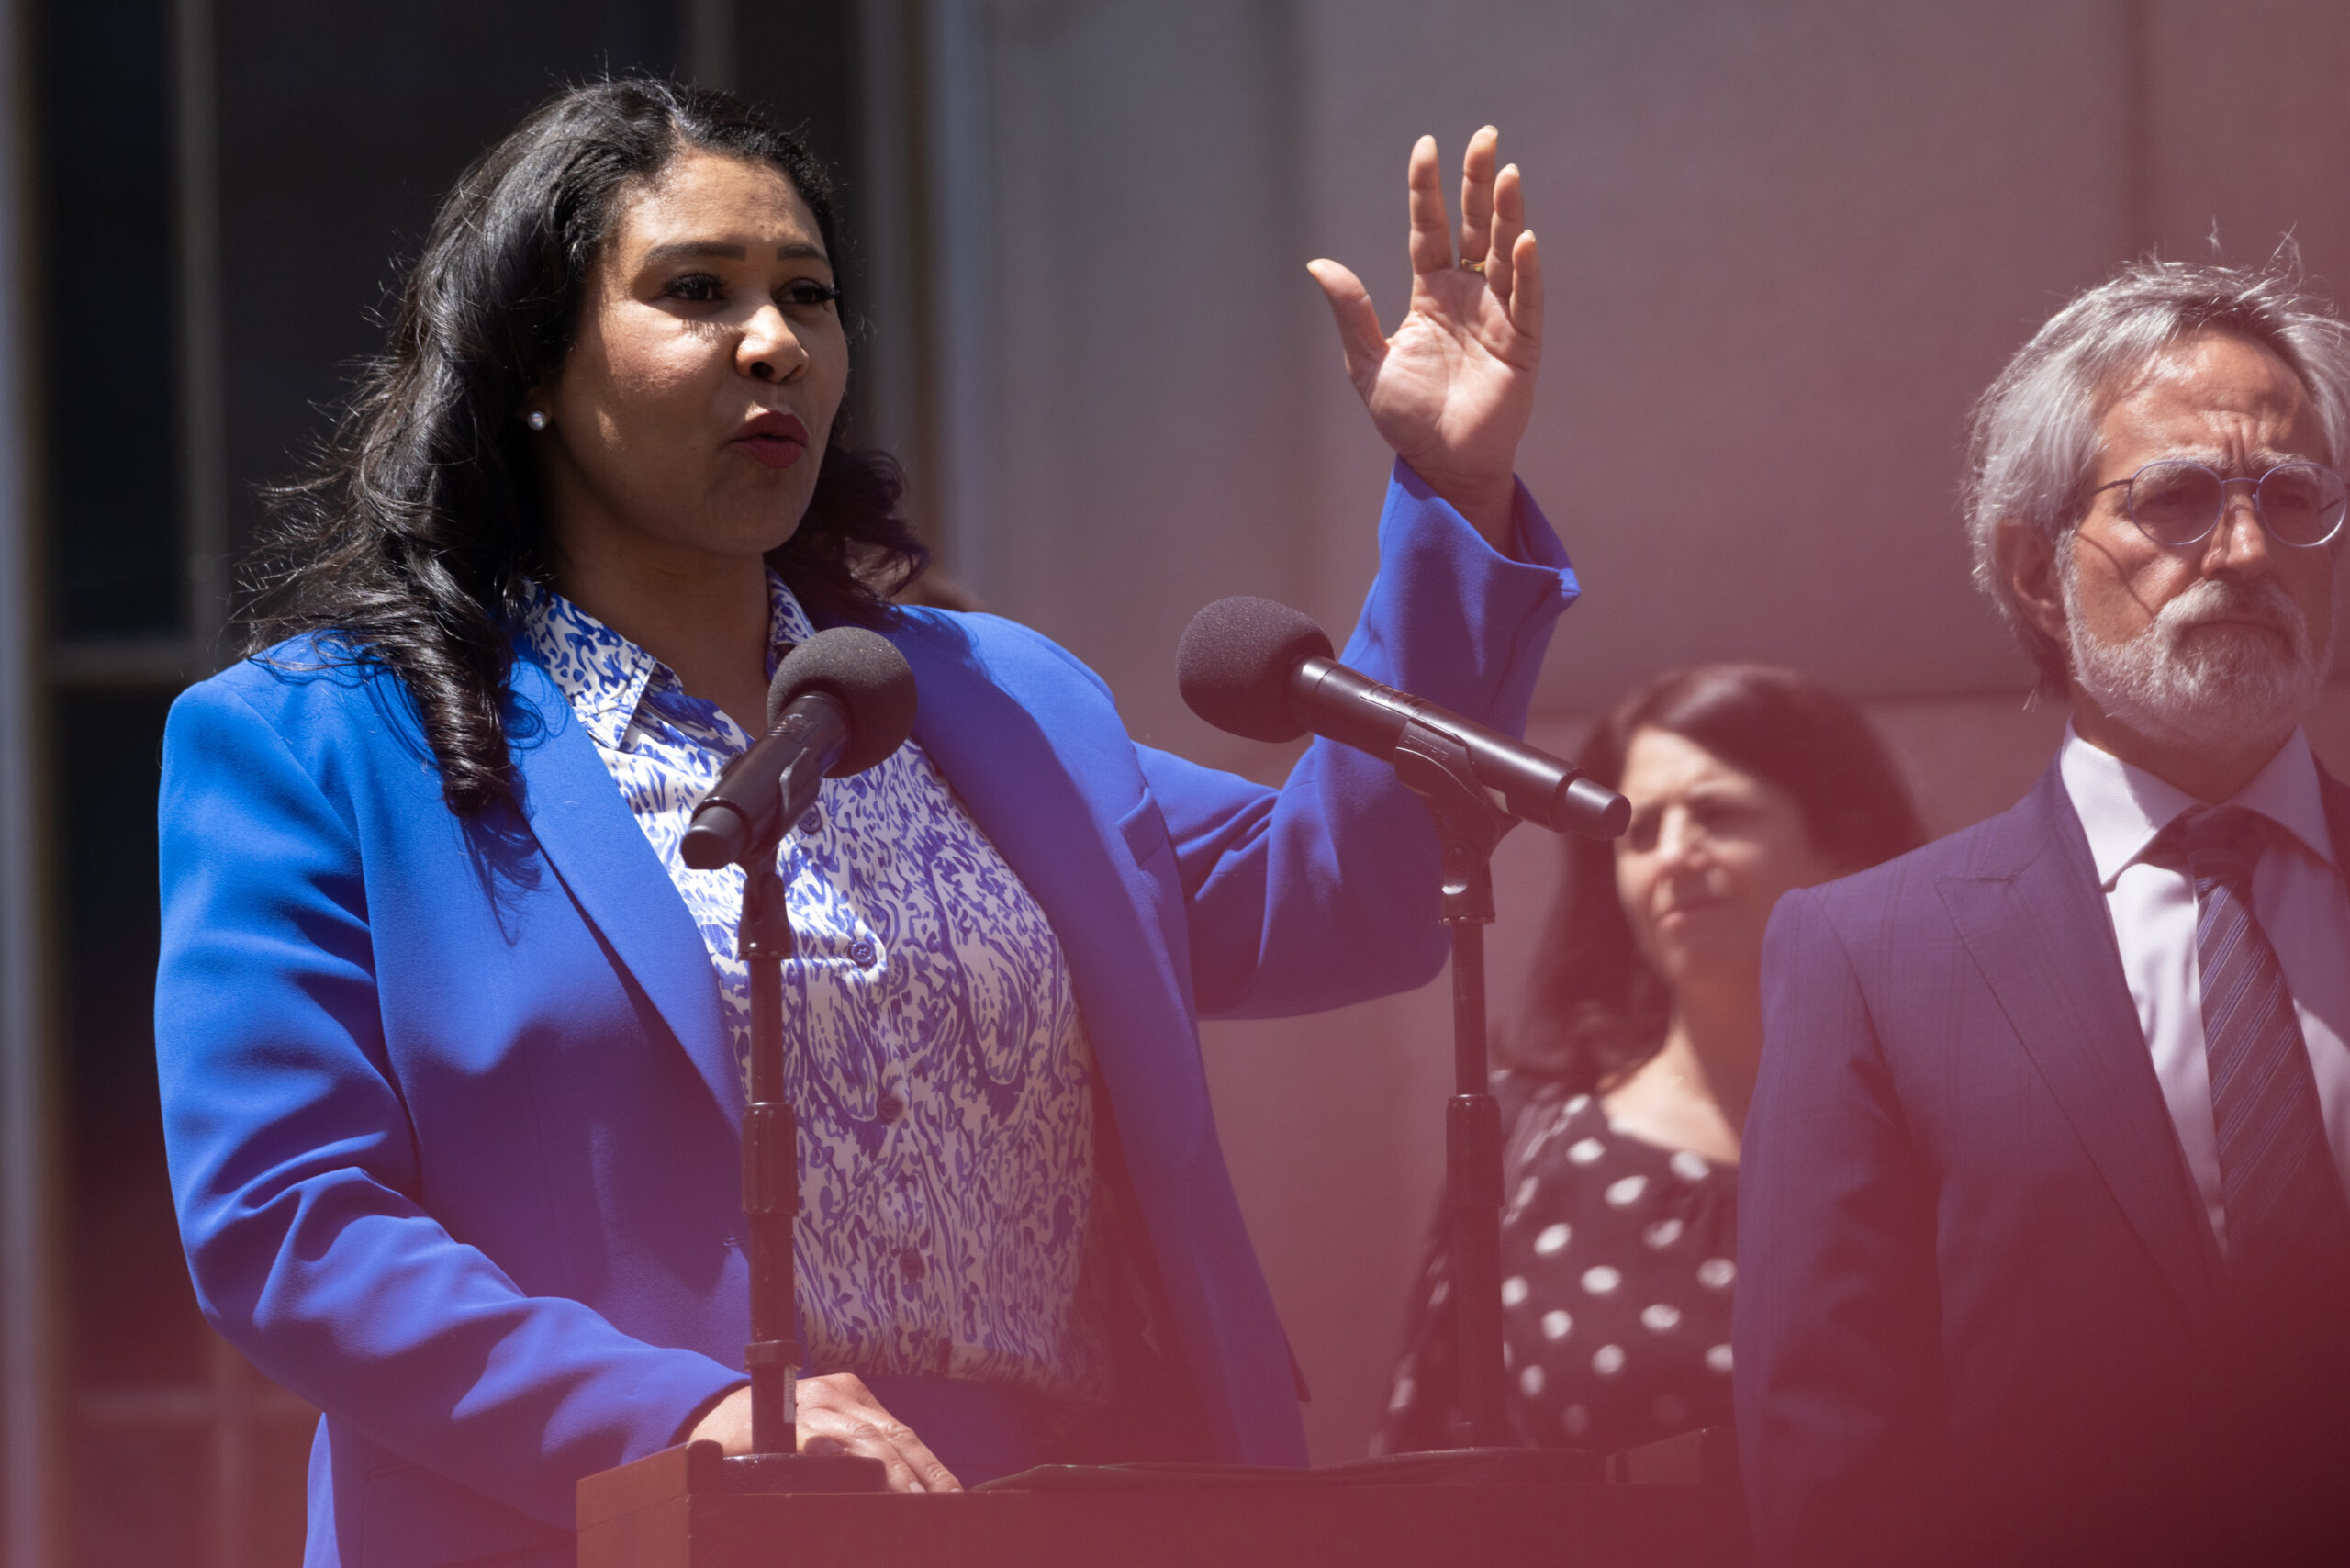 A woman in a blue blazer speaks at a podium, raising her hand, with two people behind her.